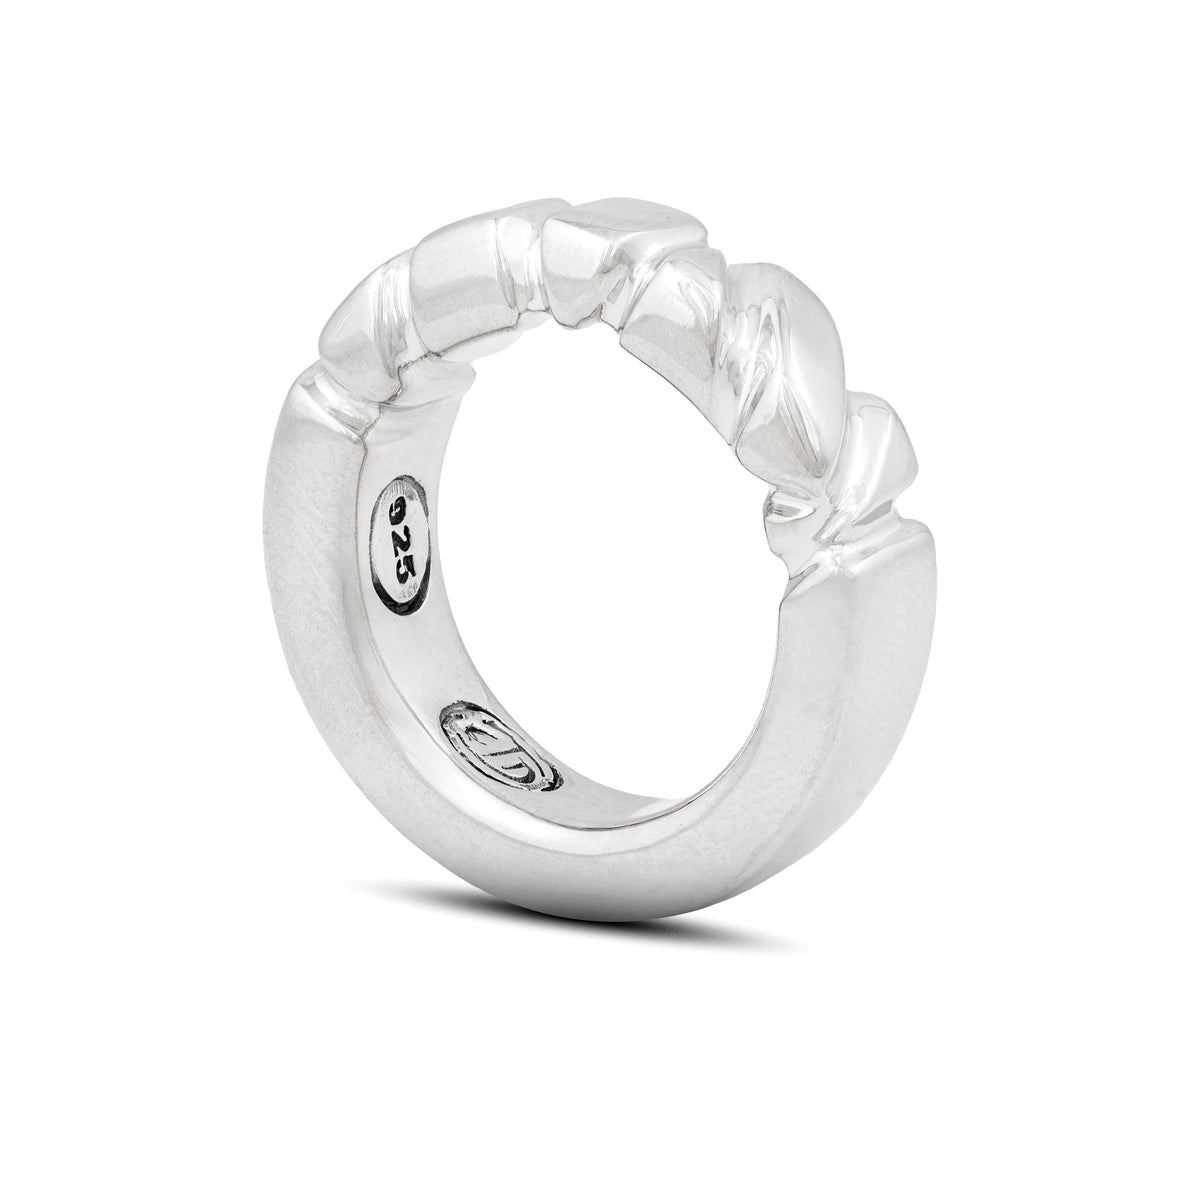 Solid, strong, sturdy designer silver ring. Cristina Tamames Jewelry Designer.